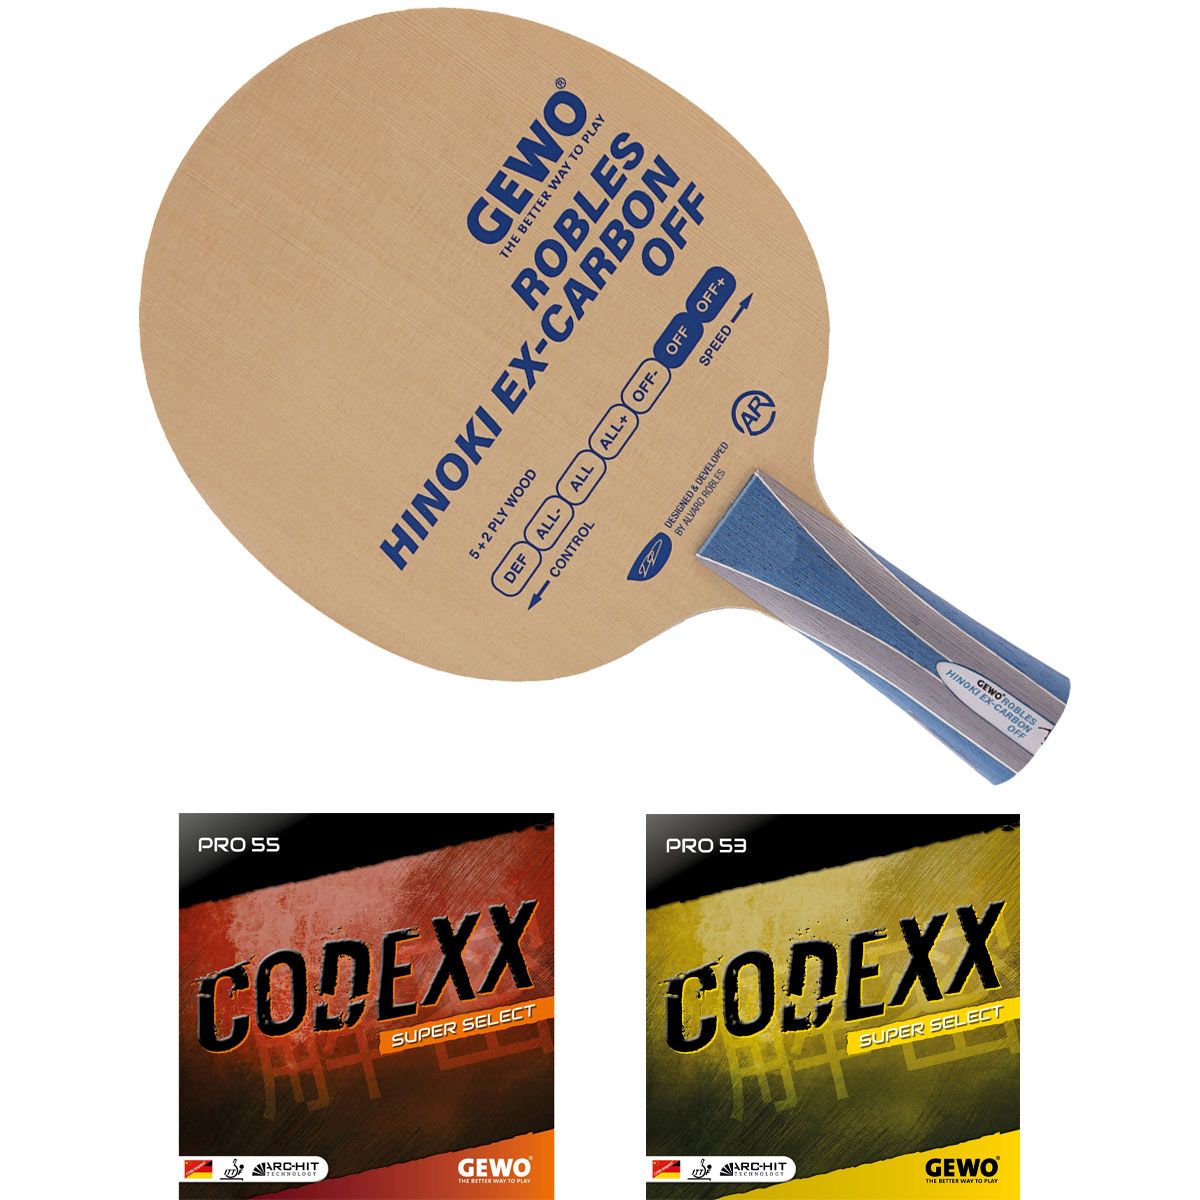 GEWO Robles Hinoki with Coddexx Pro 55 Super Select Combo Special